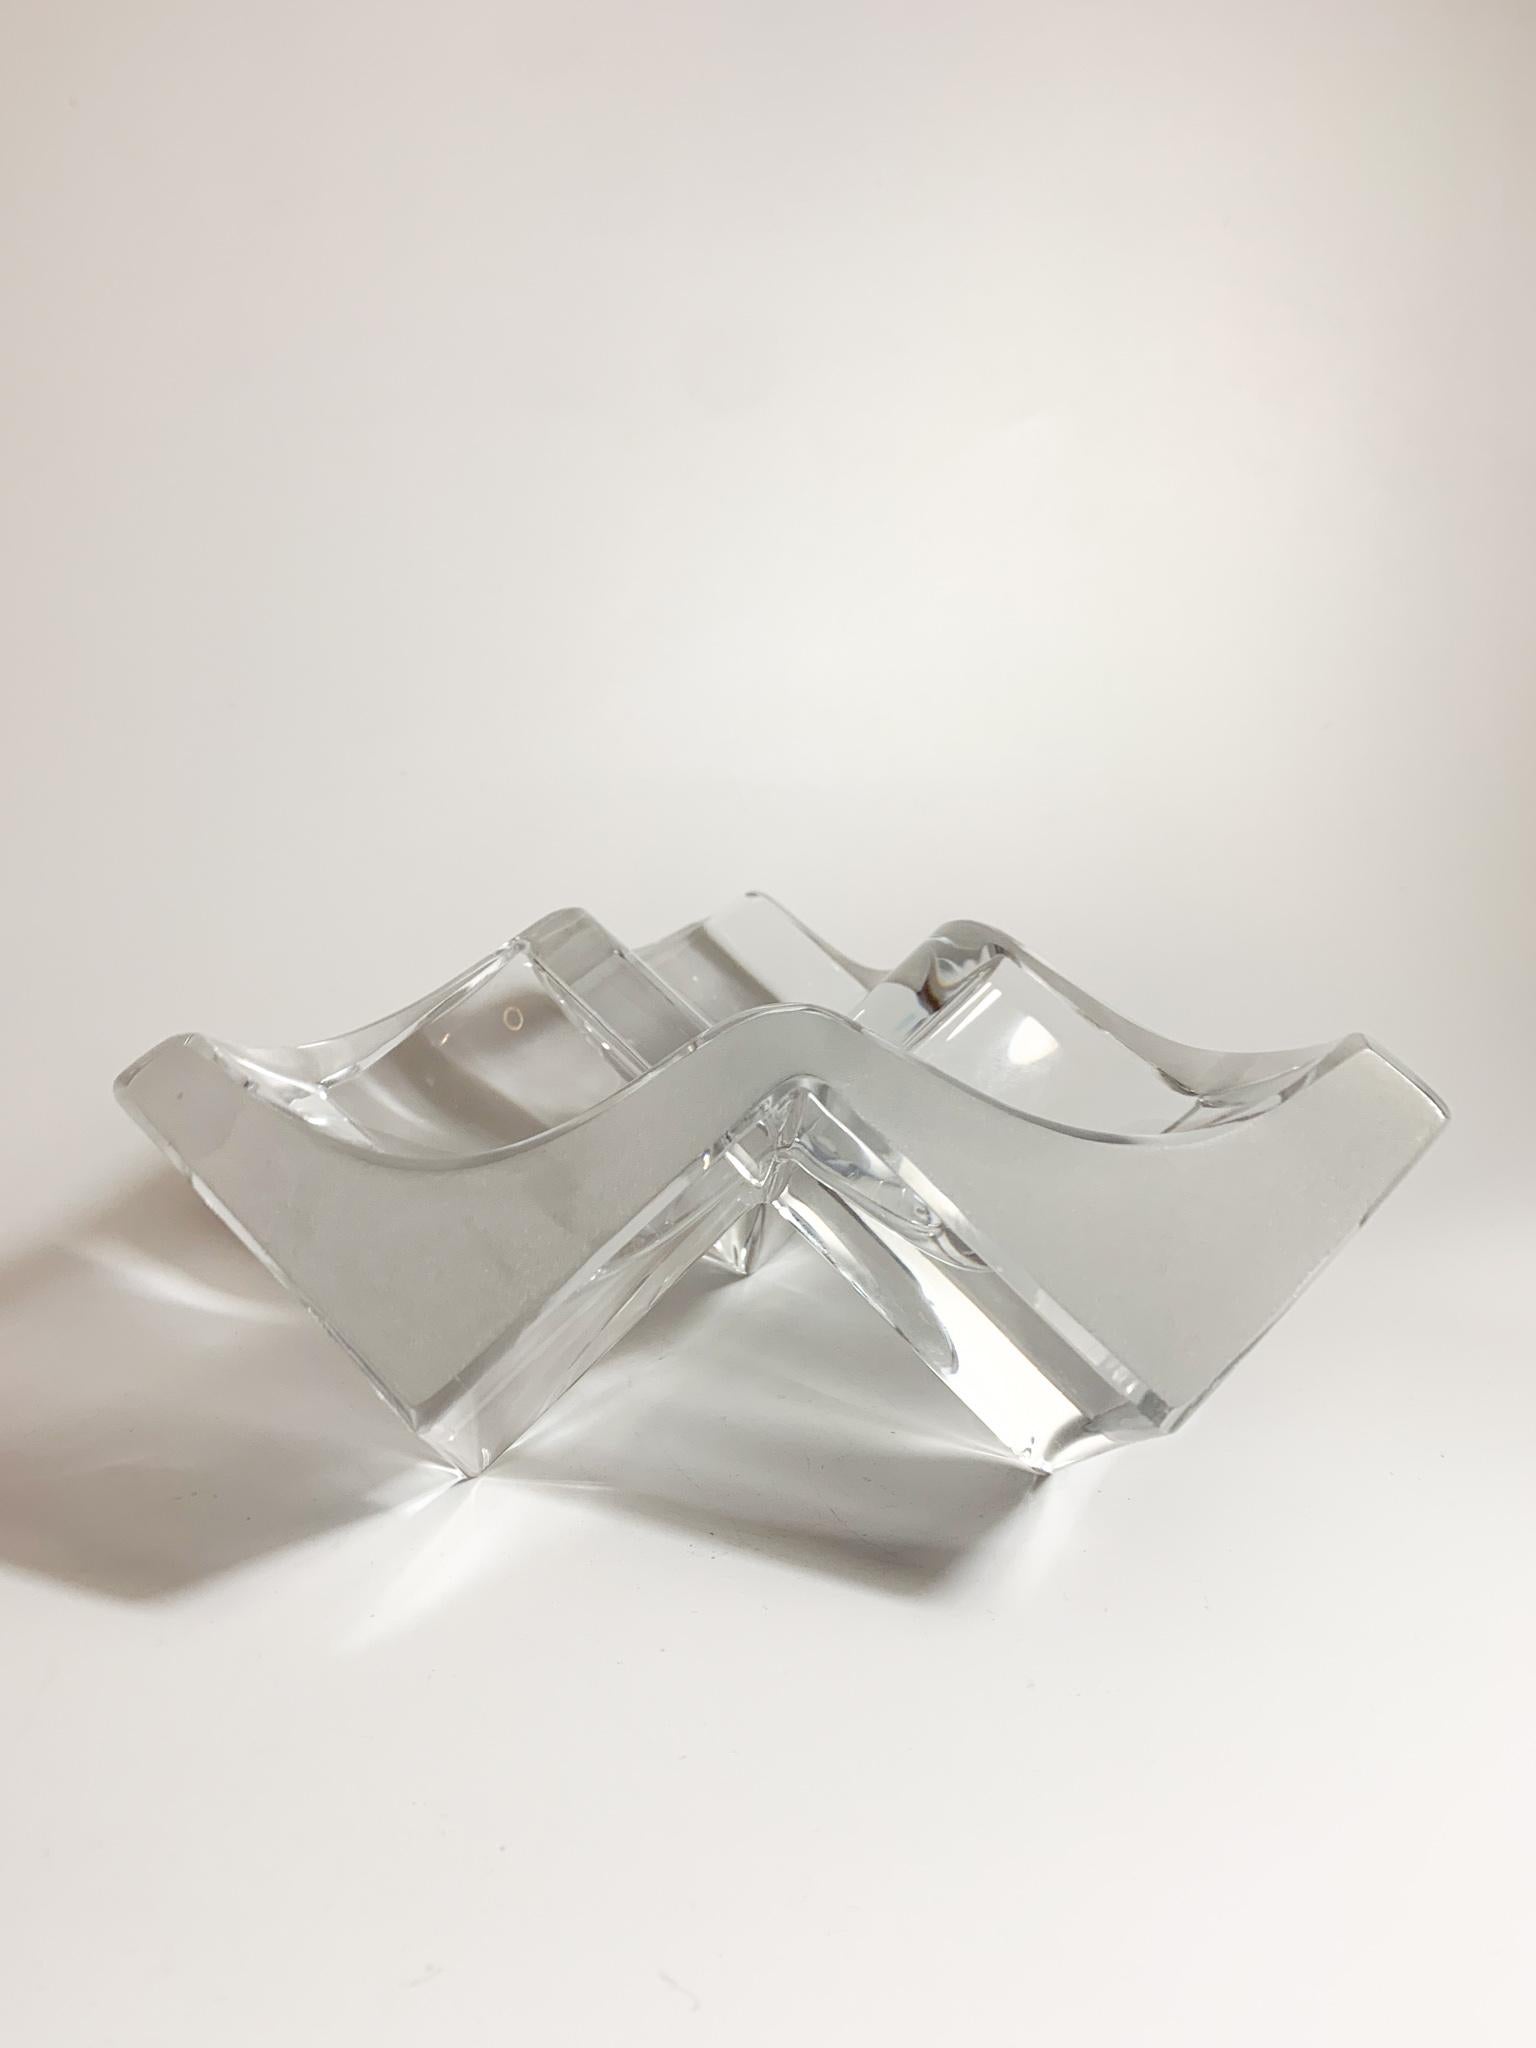 Geometric sculpture in transparent Daum crystal, made in the 70s

Ø cm 19 Ø cm 19 h cm 9

Daum It is a historic glass factory founded in France in 1878 by Jean Daum. 

From the very beginning he created crystal objects produced with the glass